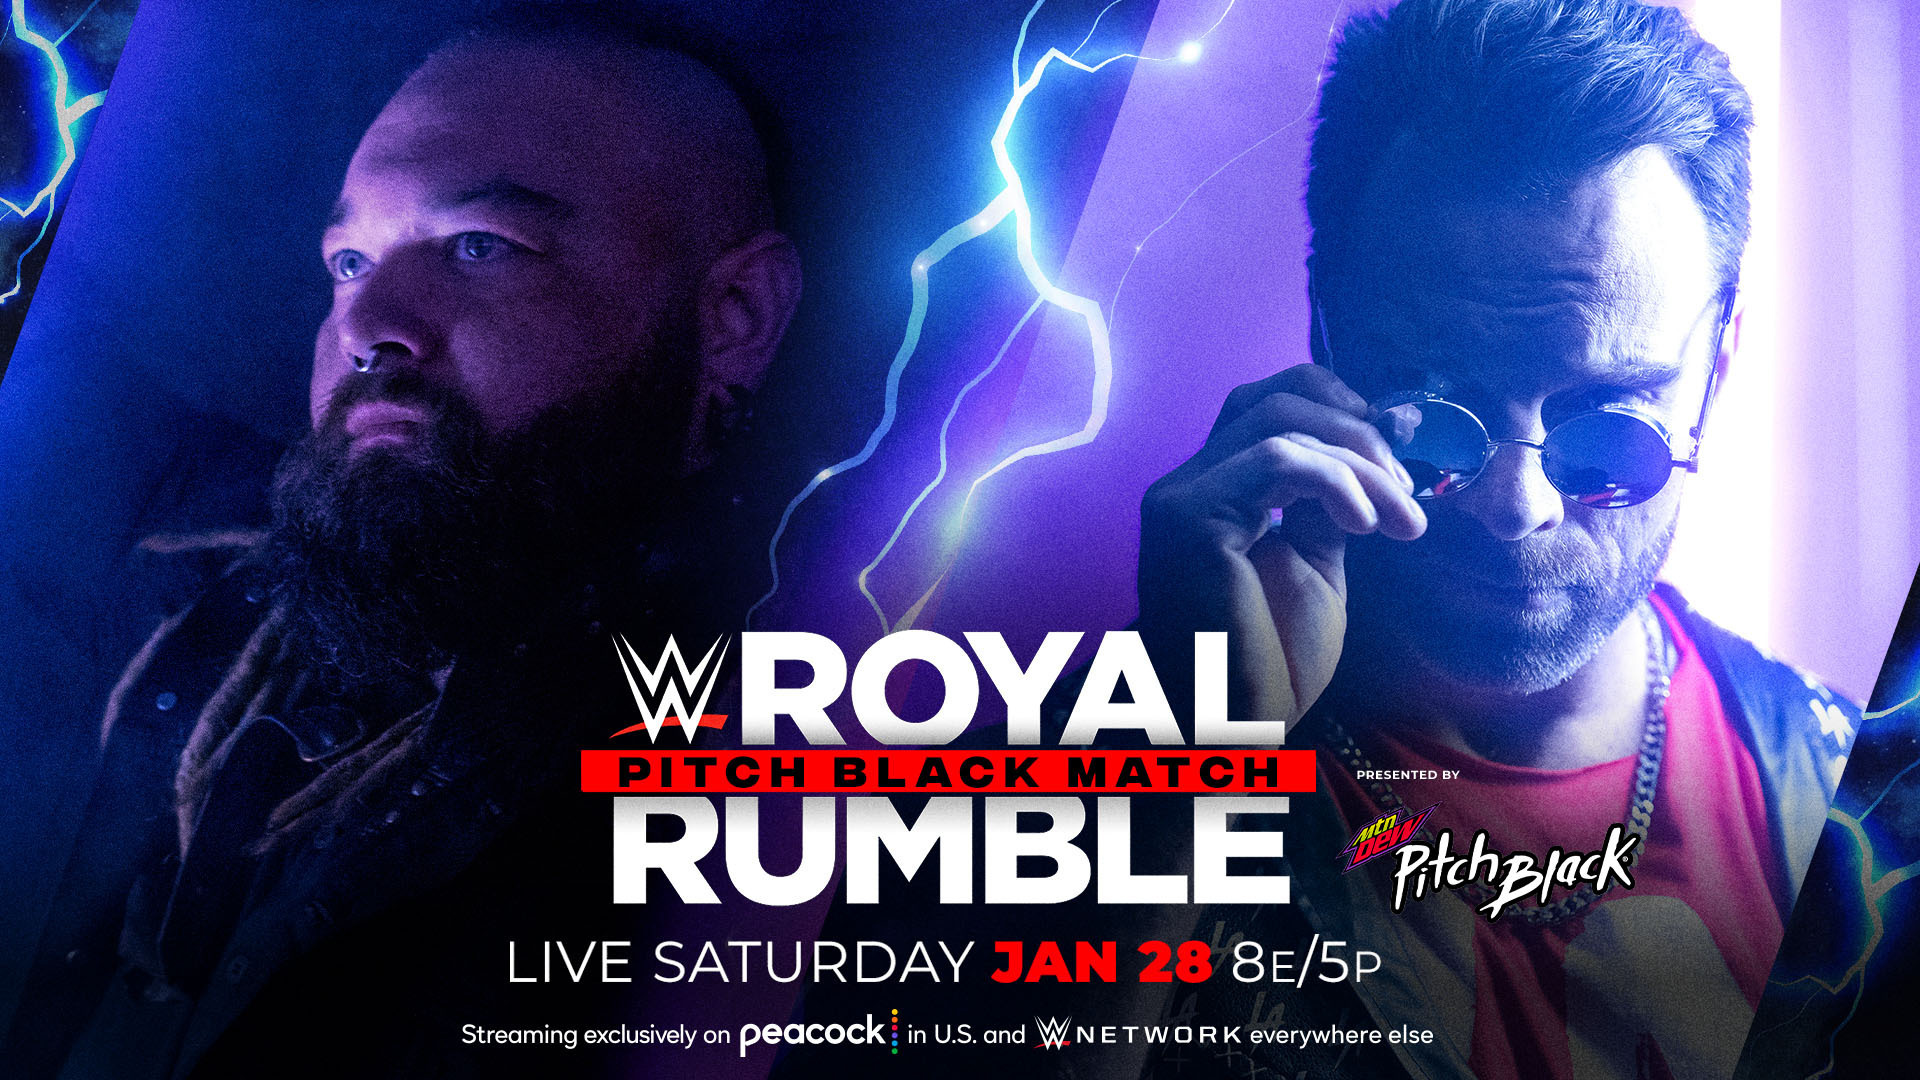 Pitch Black Match Made Official For Royal Rumble